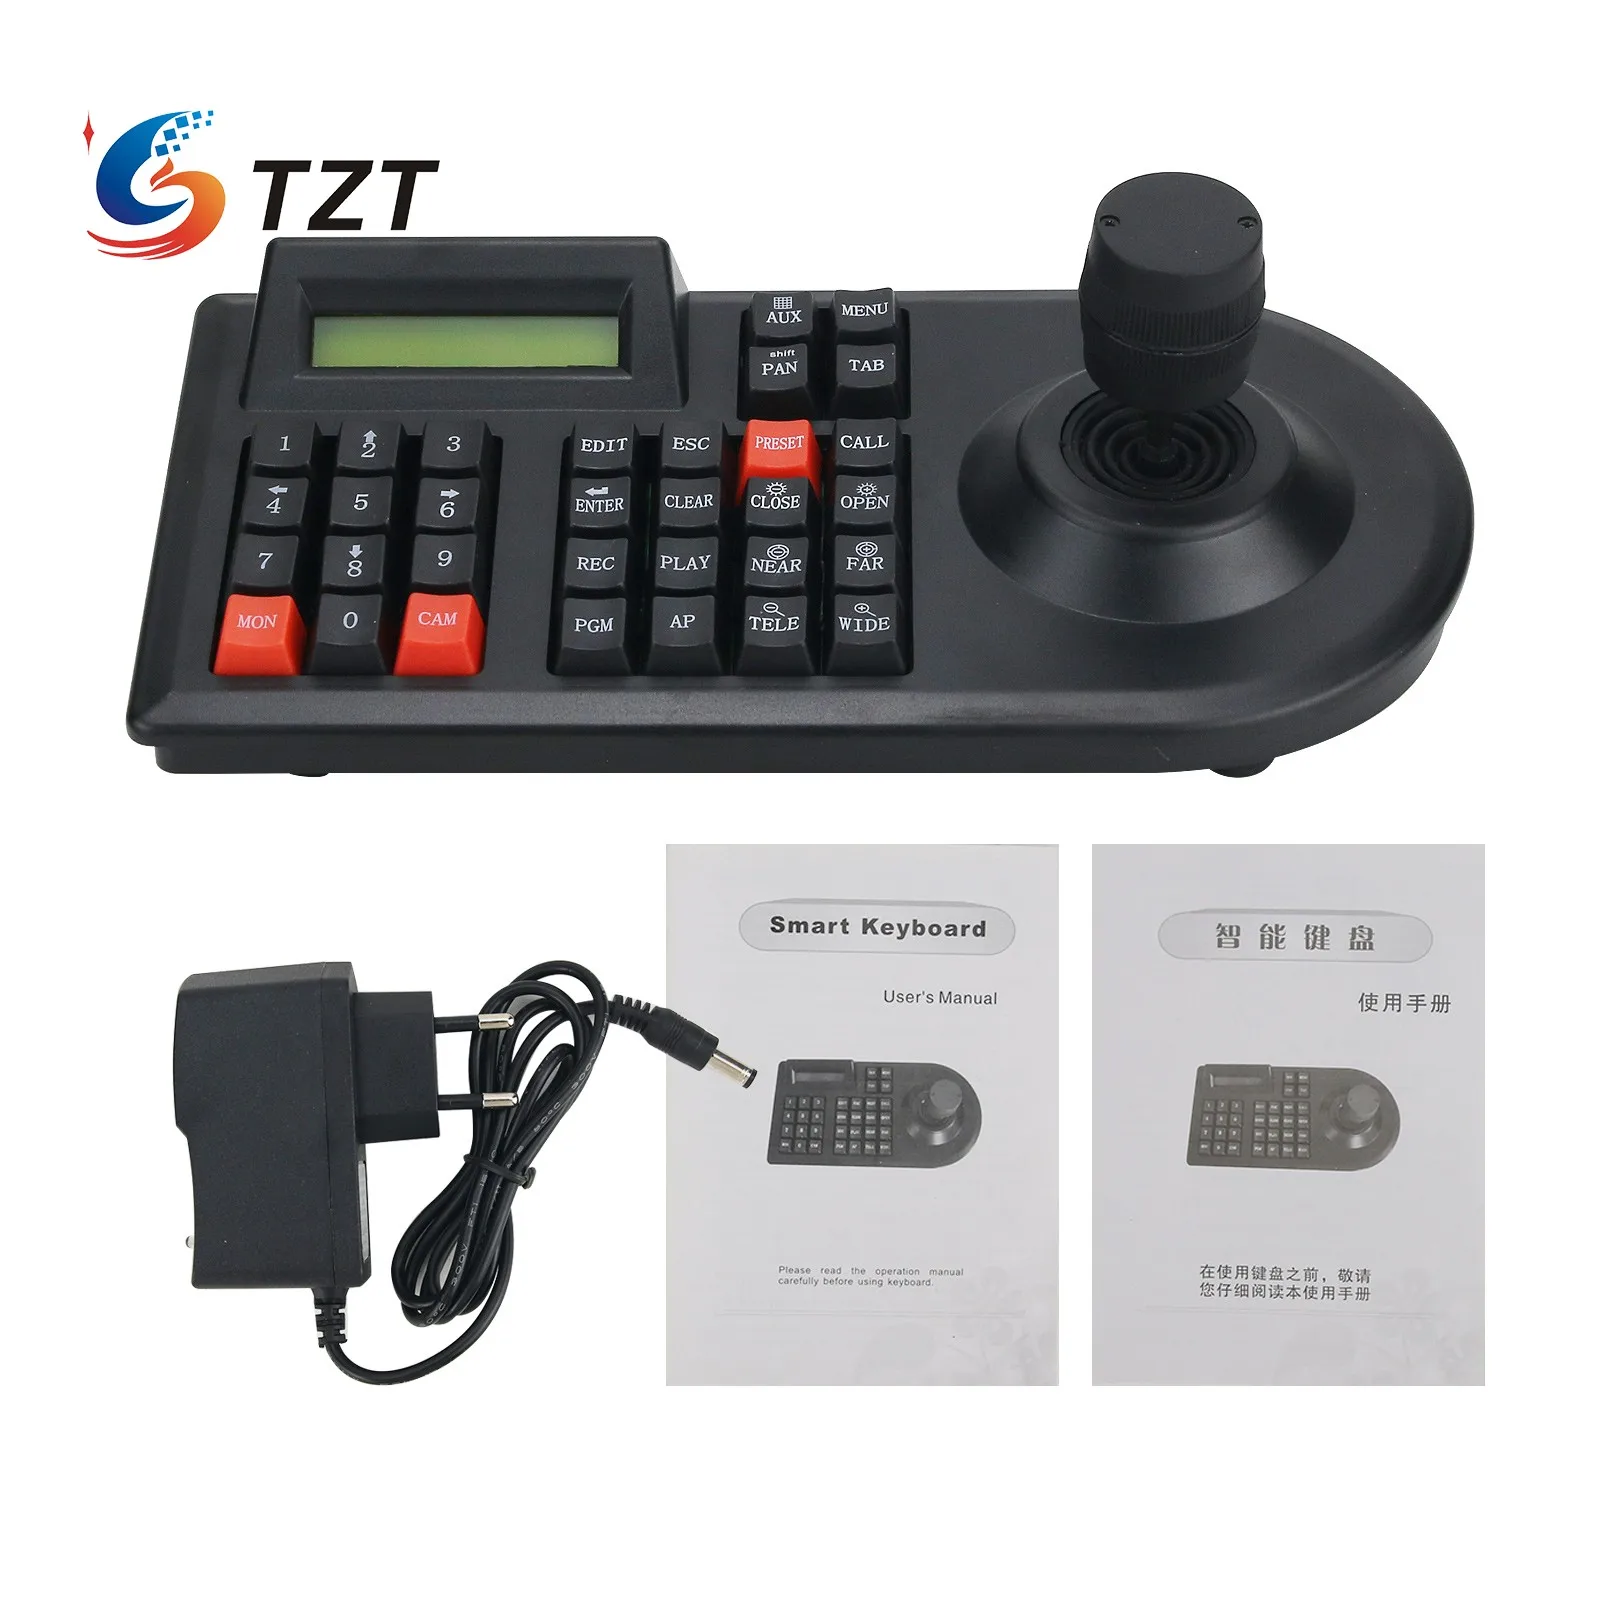 Tzt 3d Joystick Ptz Keyboard 9vdc For Cctv Camera Dom Rs485 Control  Pts3103c - Voice Recognition/control Modules - AliExpress